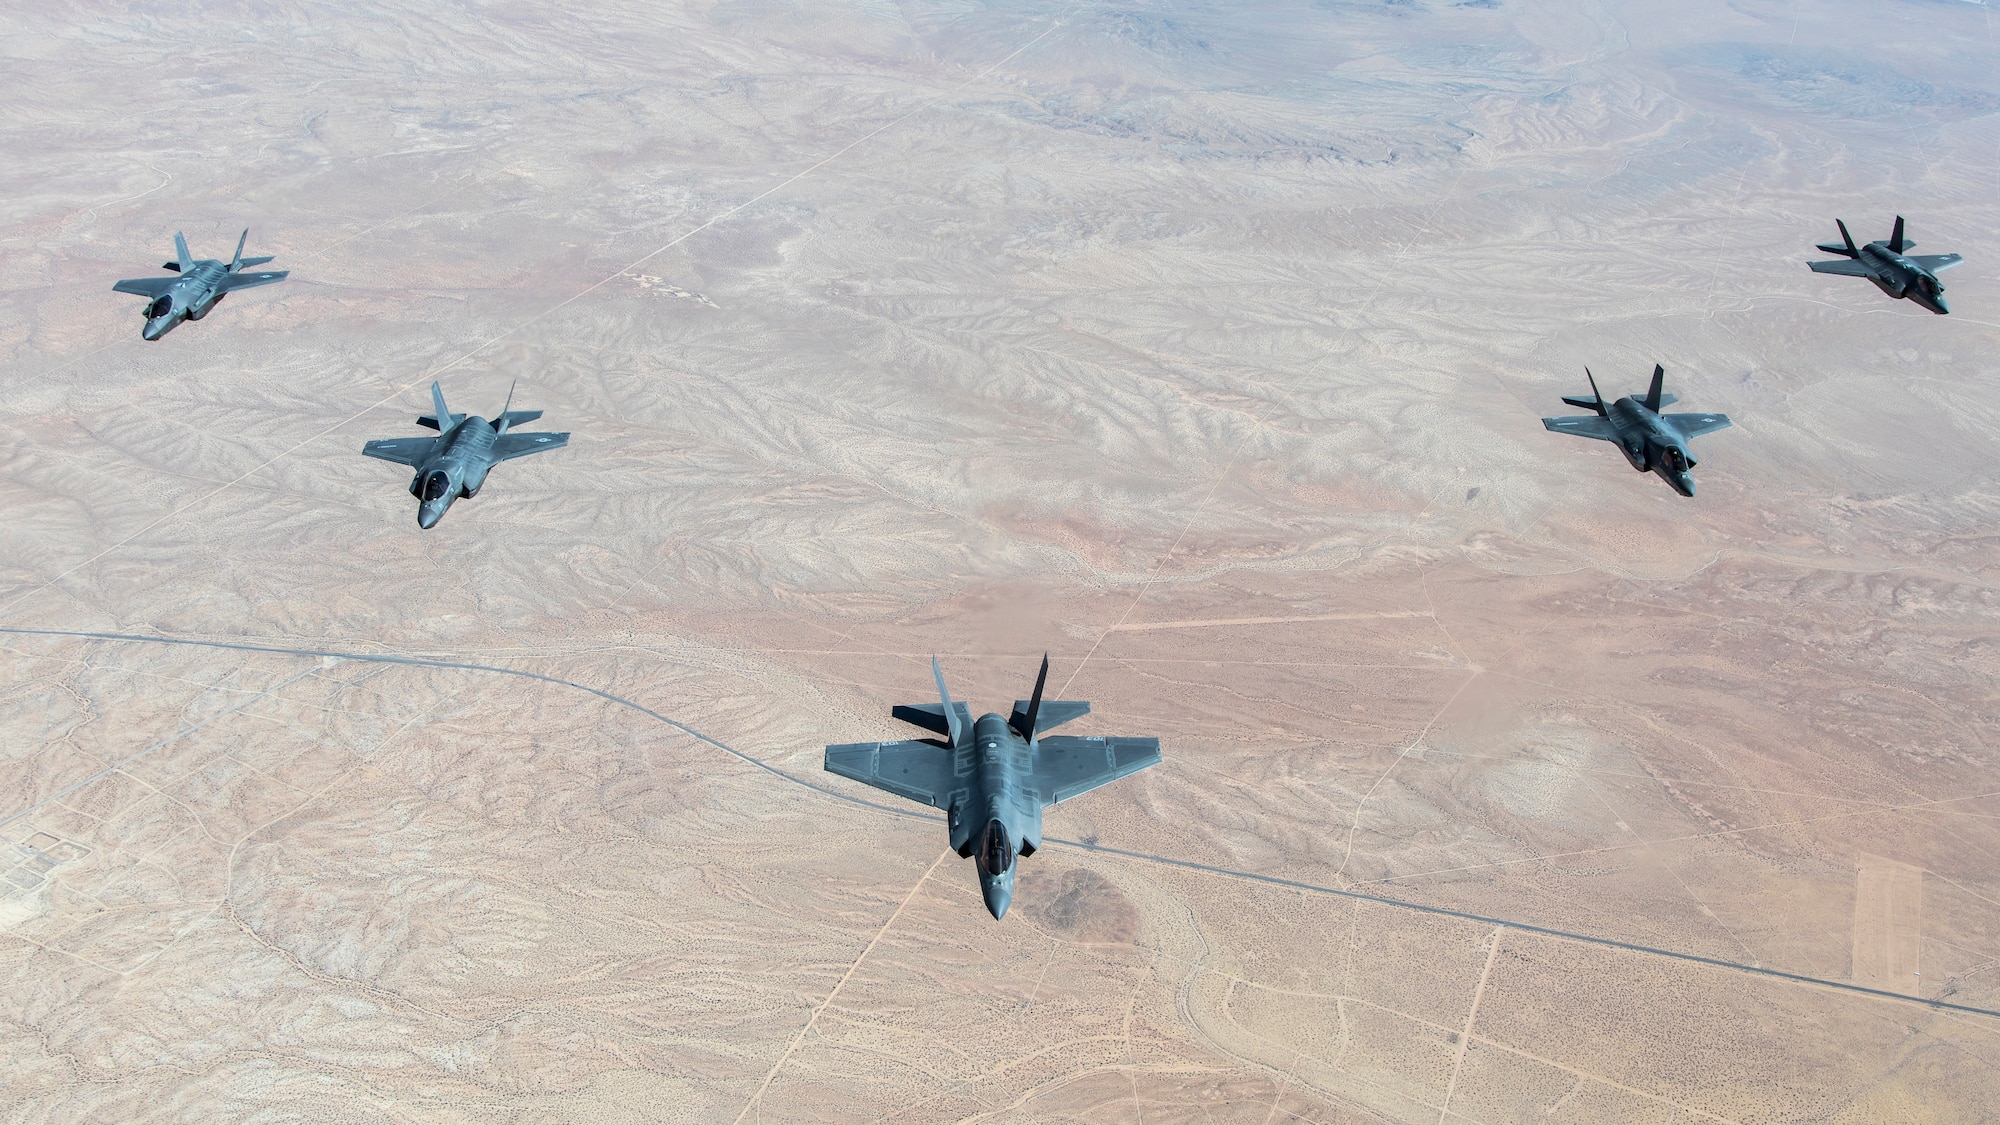 A formation flight of F-35 Lightning IIs over Edwards Air Force Base, California. The 31st Test and Evaluation Squadron recently completed its initial operational test and evaluation mission and six F-35s were reassigned to the 422nd Test and Evaluation Squadron at Nellis Air Force Base, Nevada. (Photo courtesy of Darin Russell, Lockheed Martin)